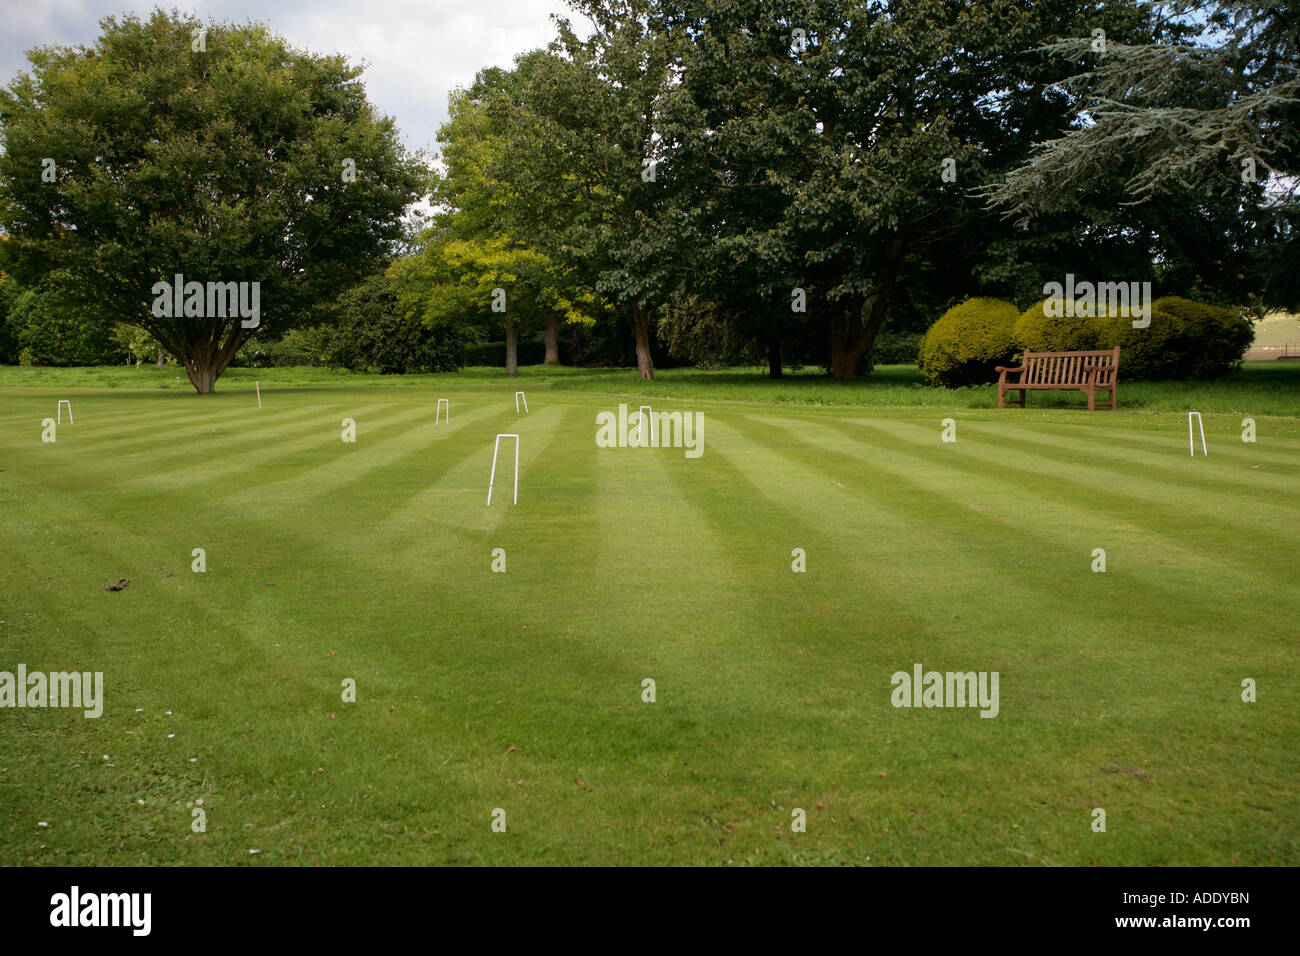 English Croquet lawn at West Dean Gardens, West Sussex, England, UK Stock Photo